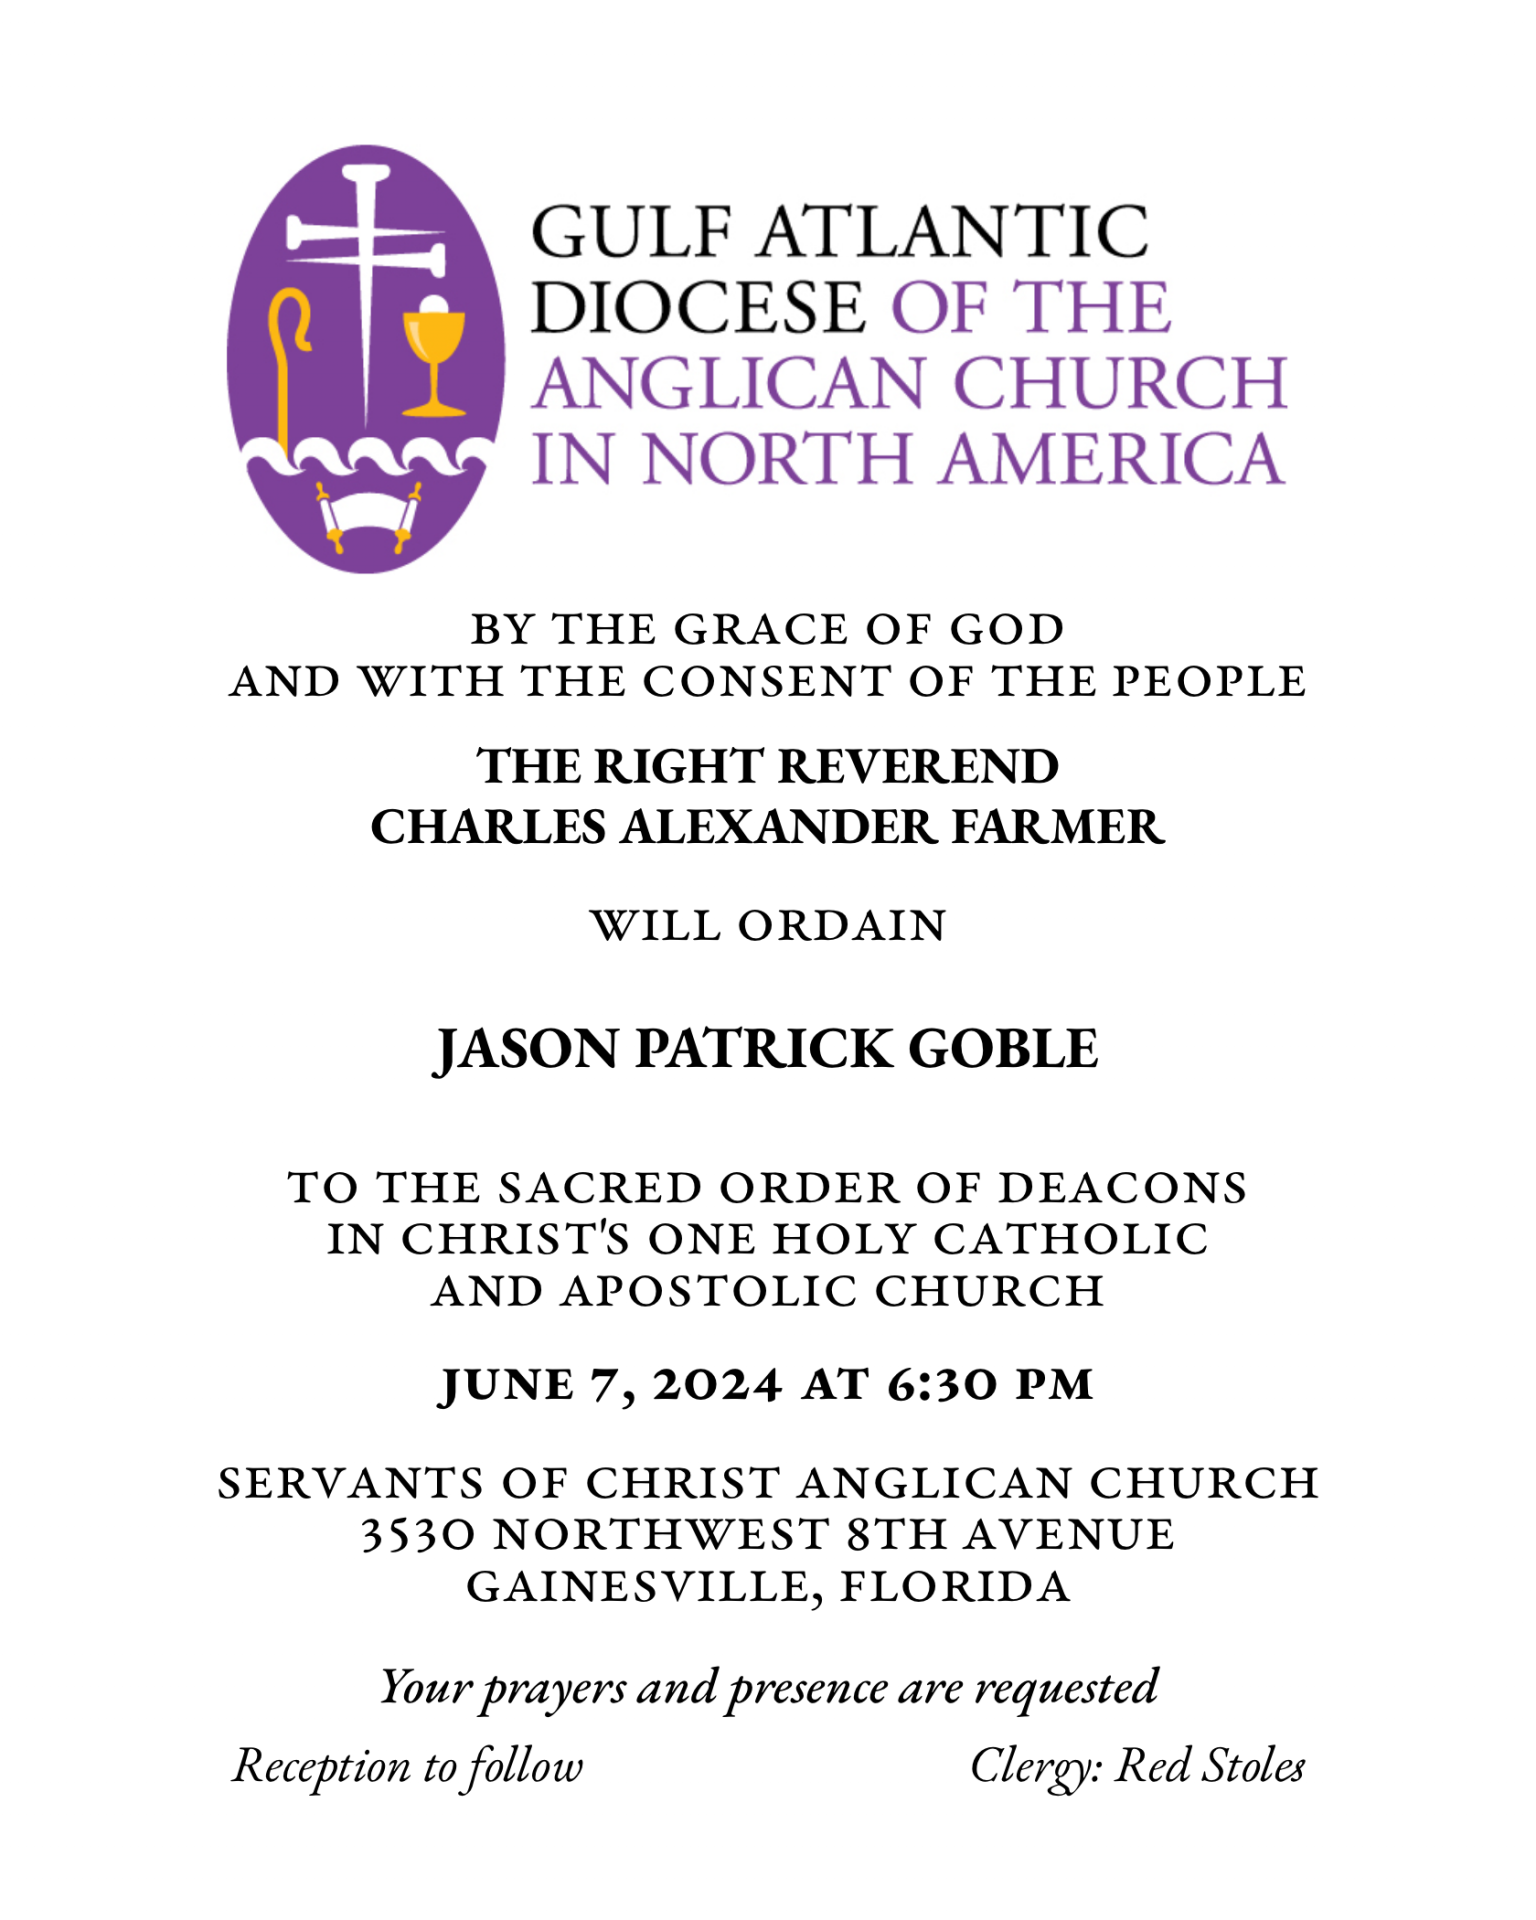 By the Grace of God
and with the consent of the People
THE RIGHT REVEREND
CHARLES ALEXANDER FARMER
will ordain
JASON PATRICK GOBLE
to the Sacred Order of Deacons
in Christ's One Holy Catholic and Apostolic Church
June 7, 2024 at 6:30 p.m.
Servants of Christ Anglican Church
3530 Northwest 8th Avenue
Gainesville, Florida
Your prayers and presence are requested